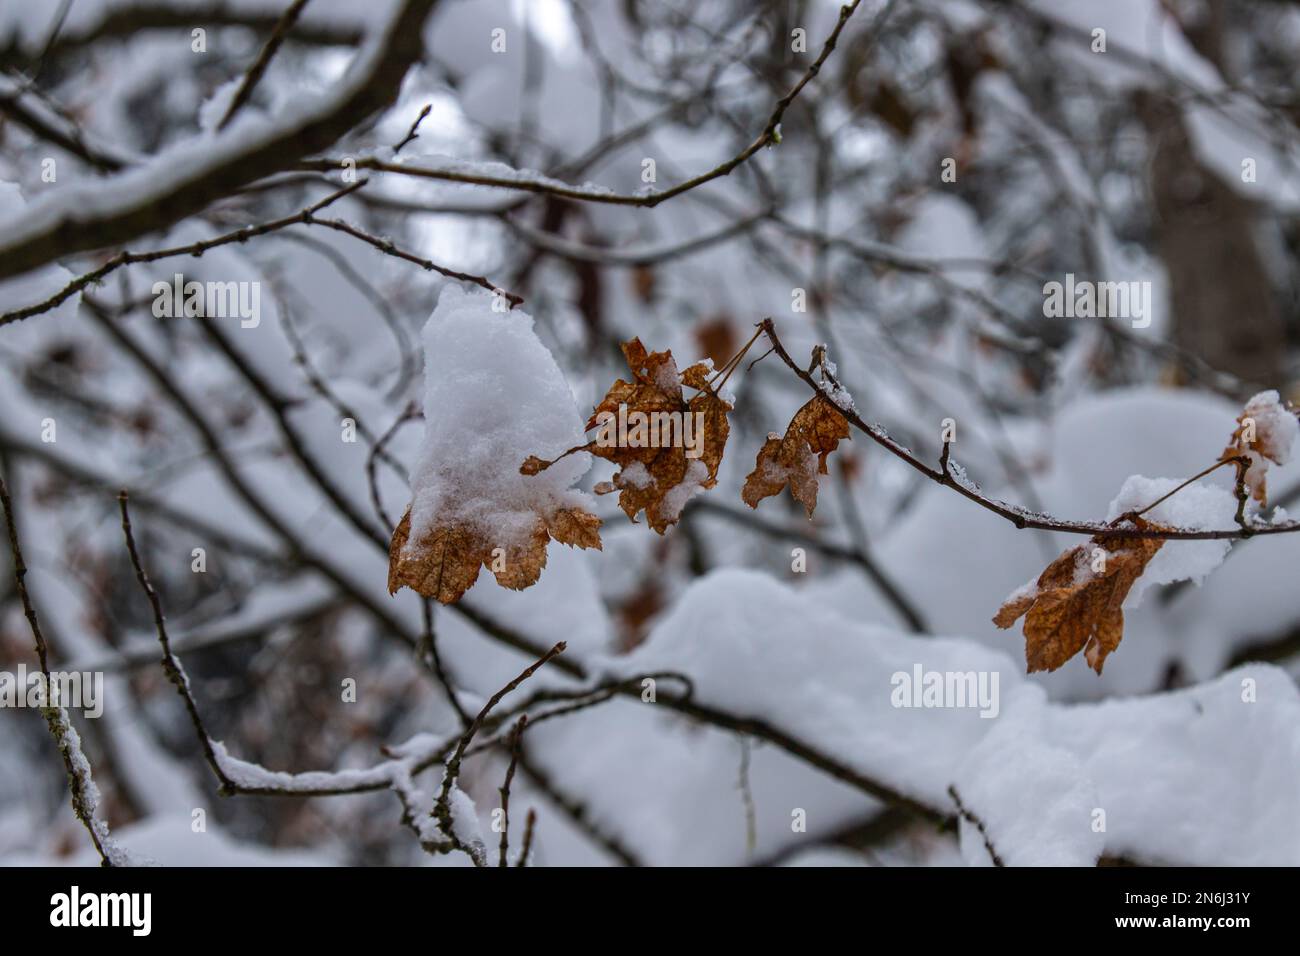 Closeup dry leaves in the snowy forest in winter season Stock Photo